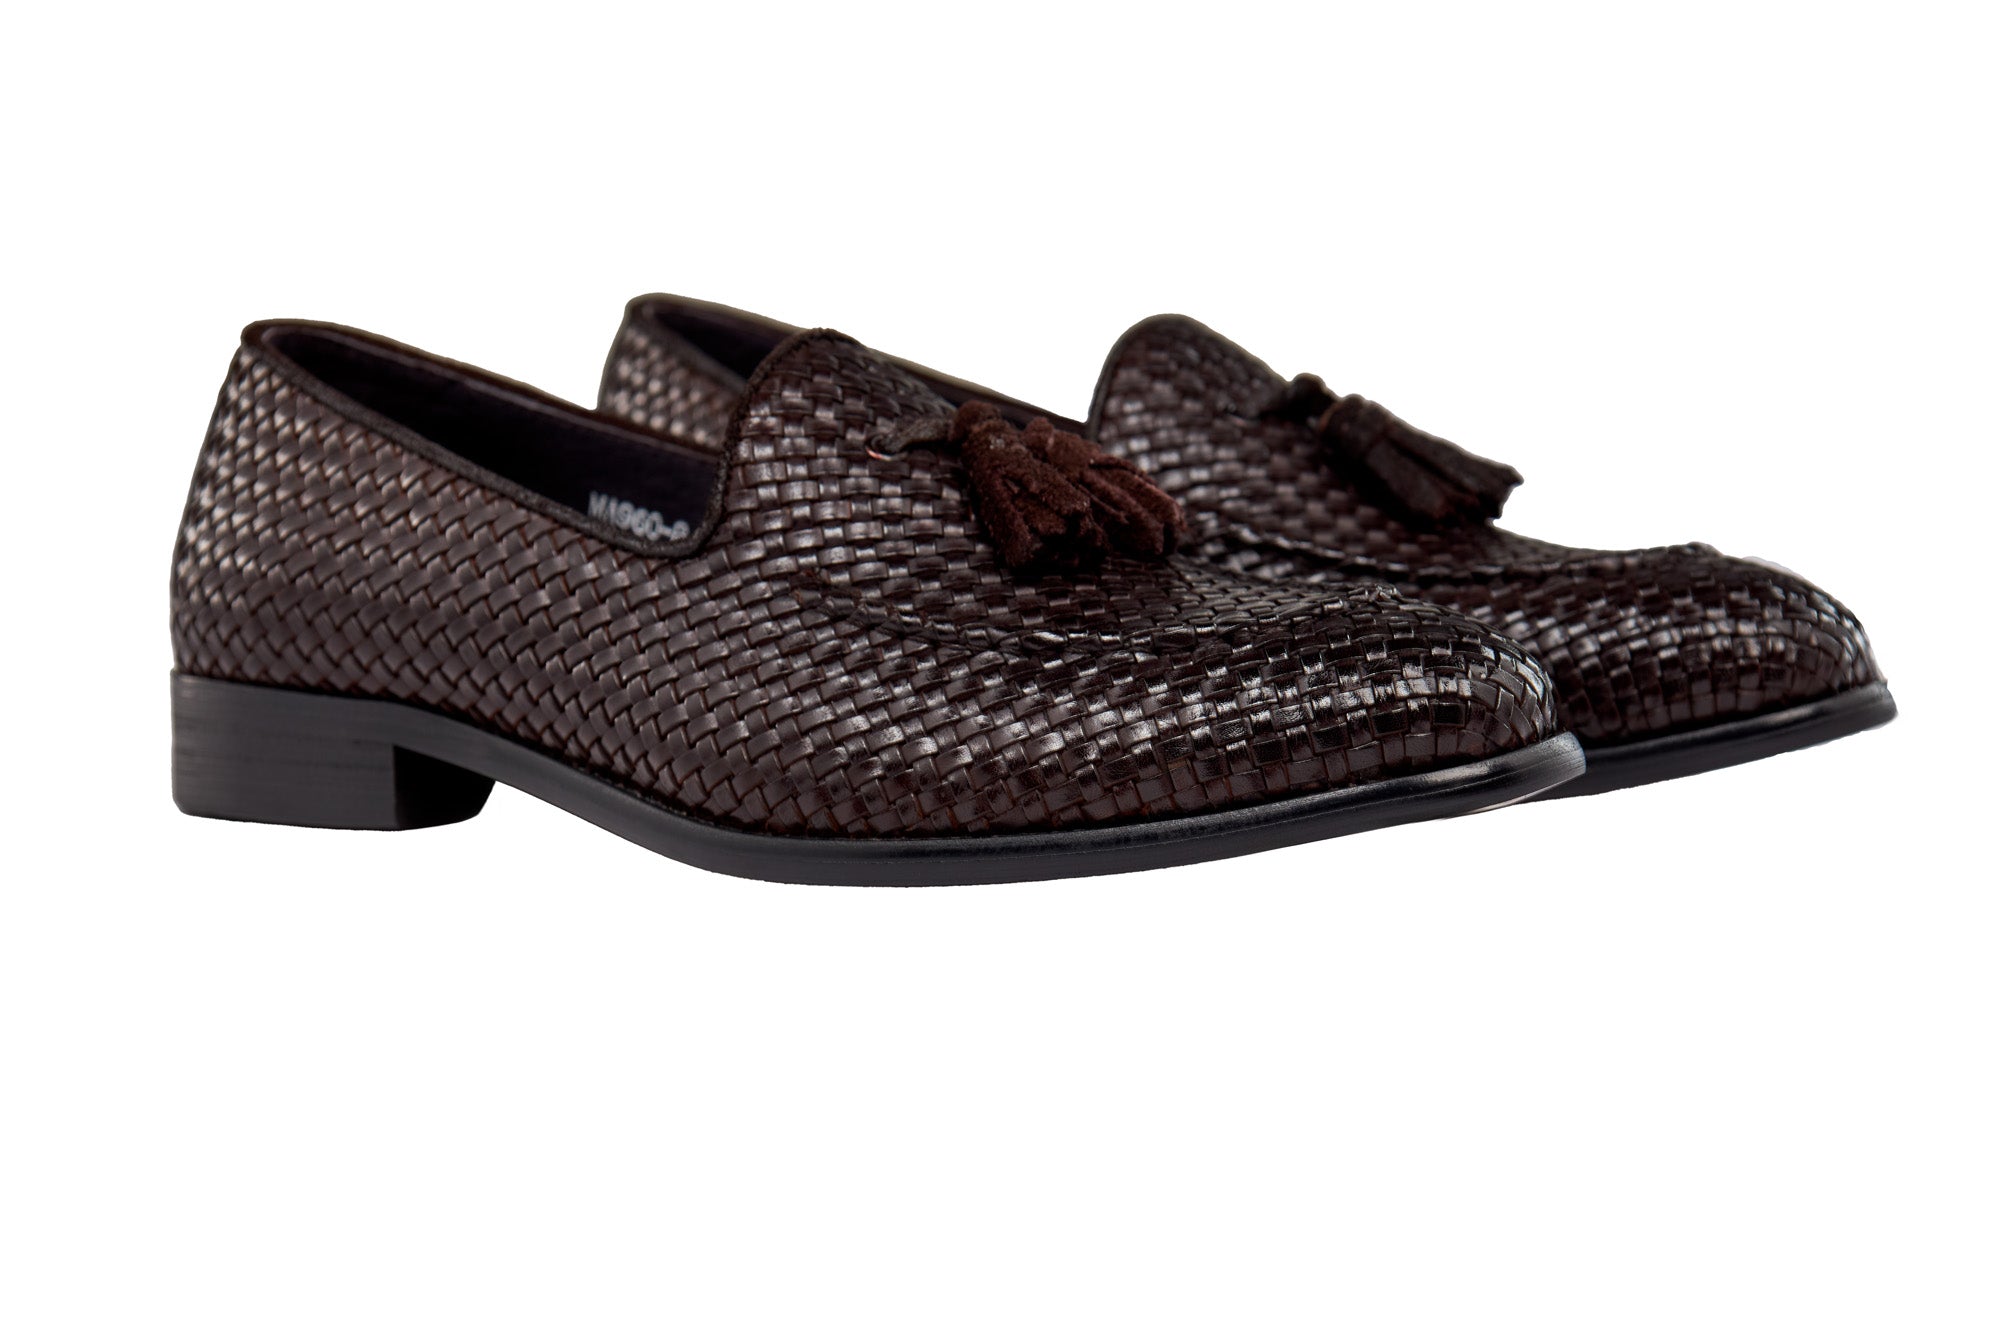 BROWN WOVEN LEATHER TASSEL LOAFER